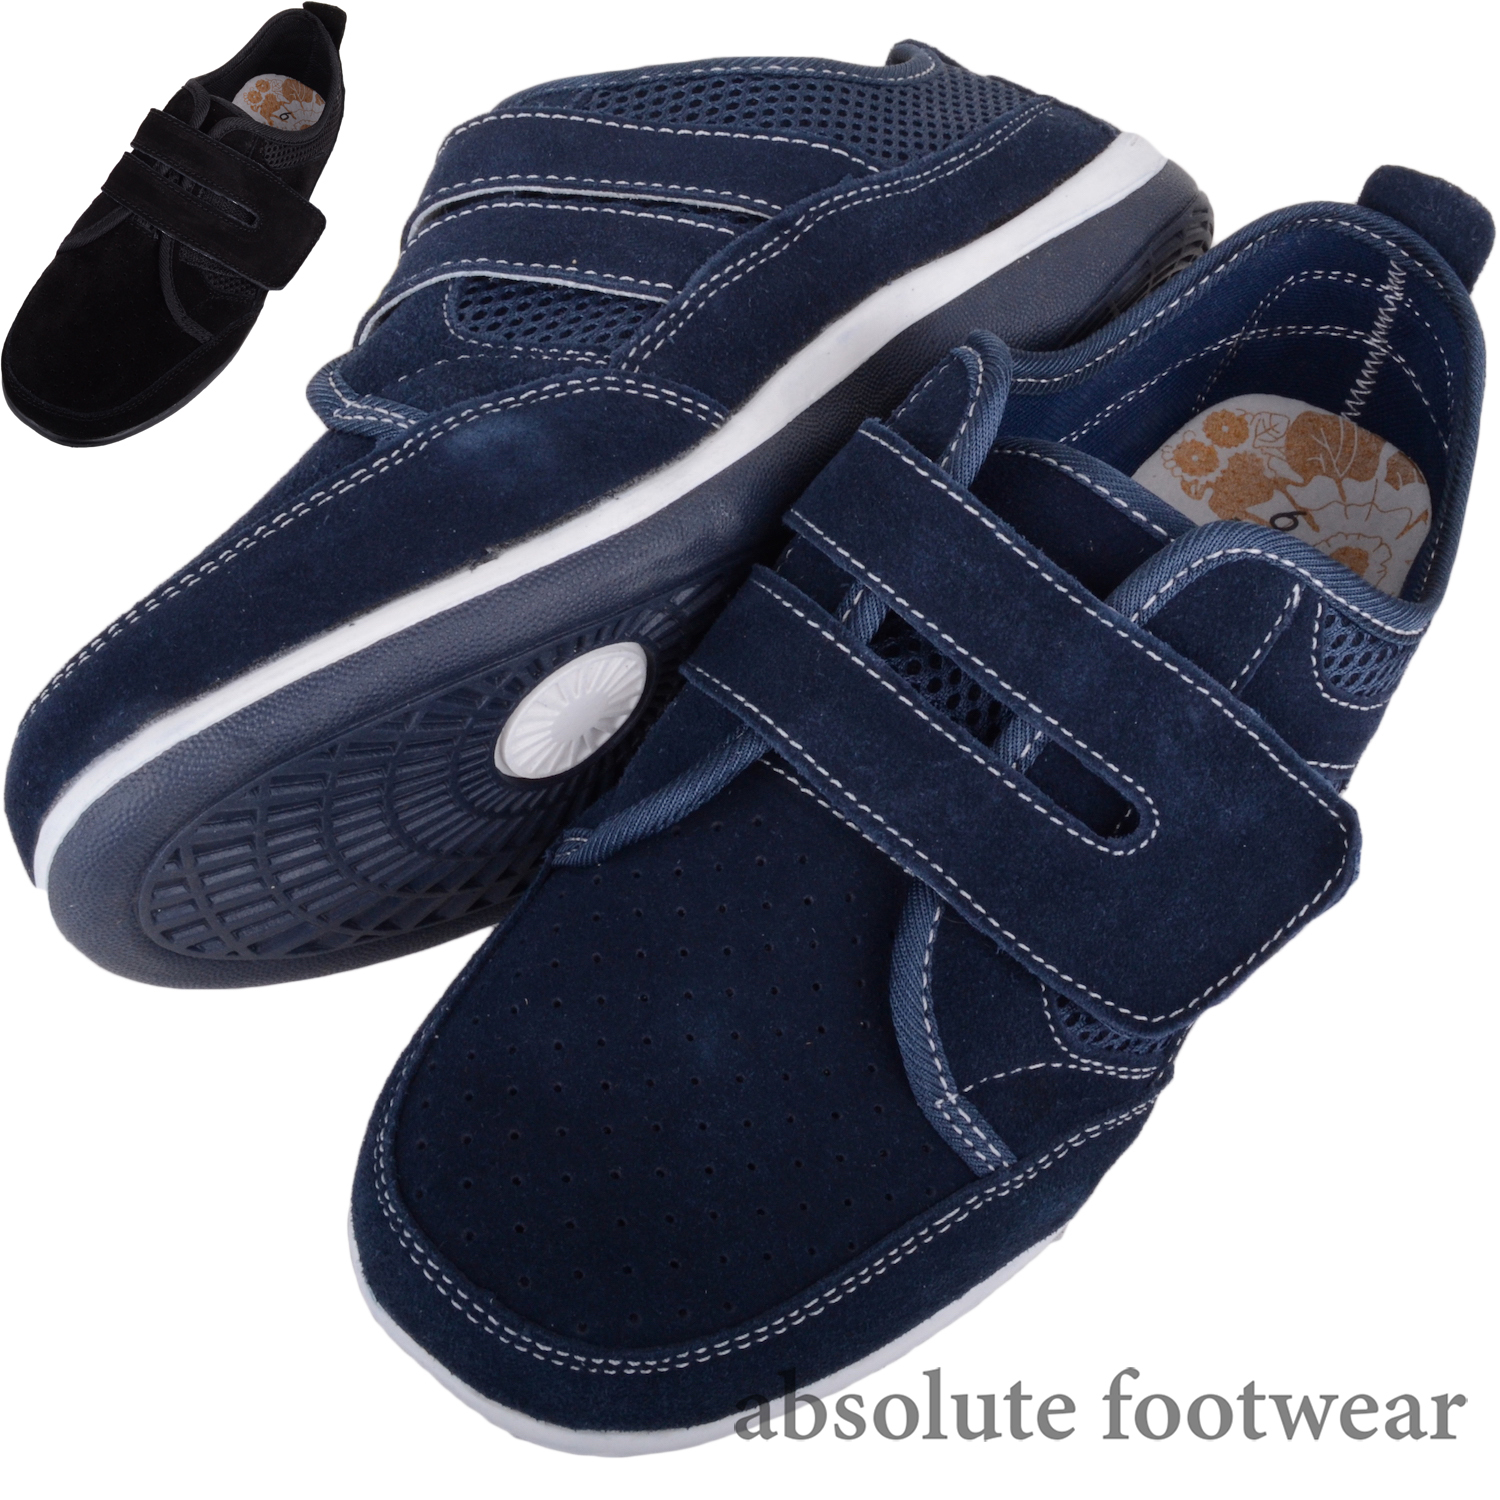 eee wide fit womens shoes